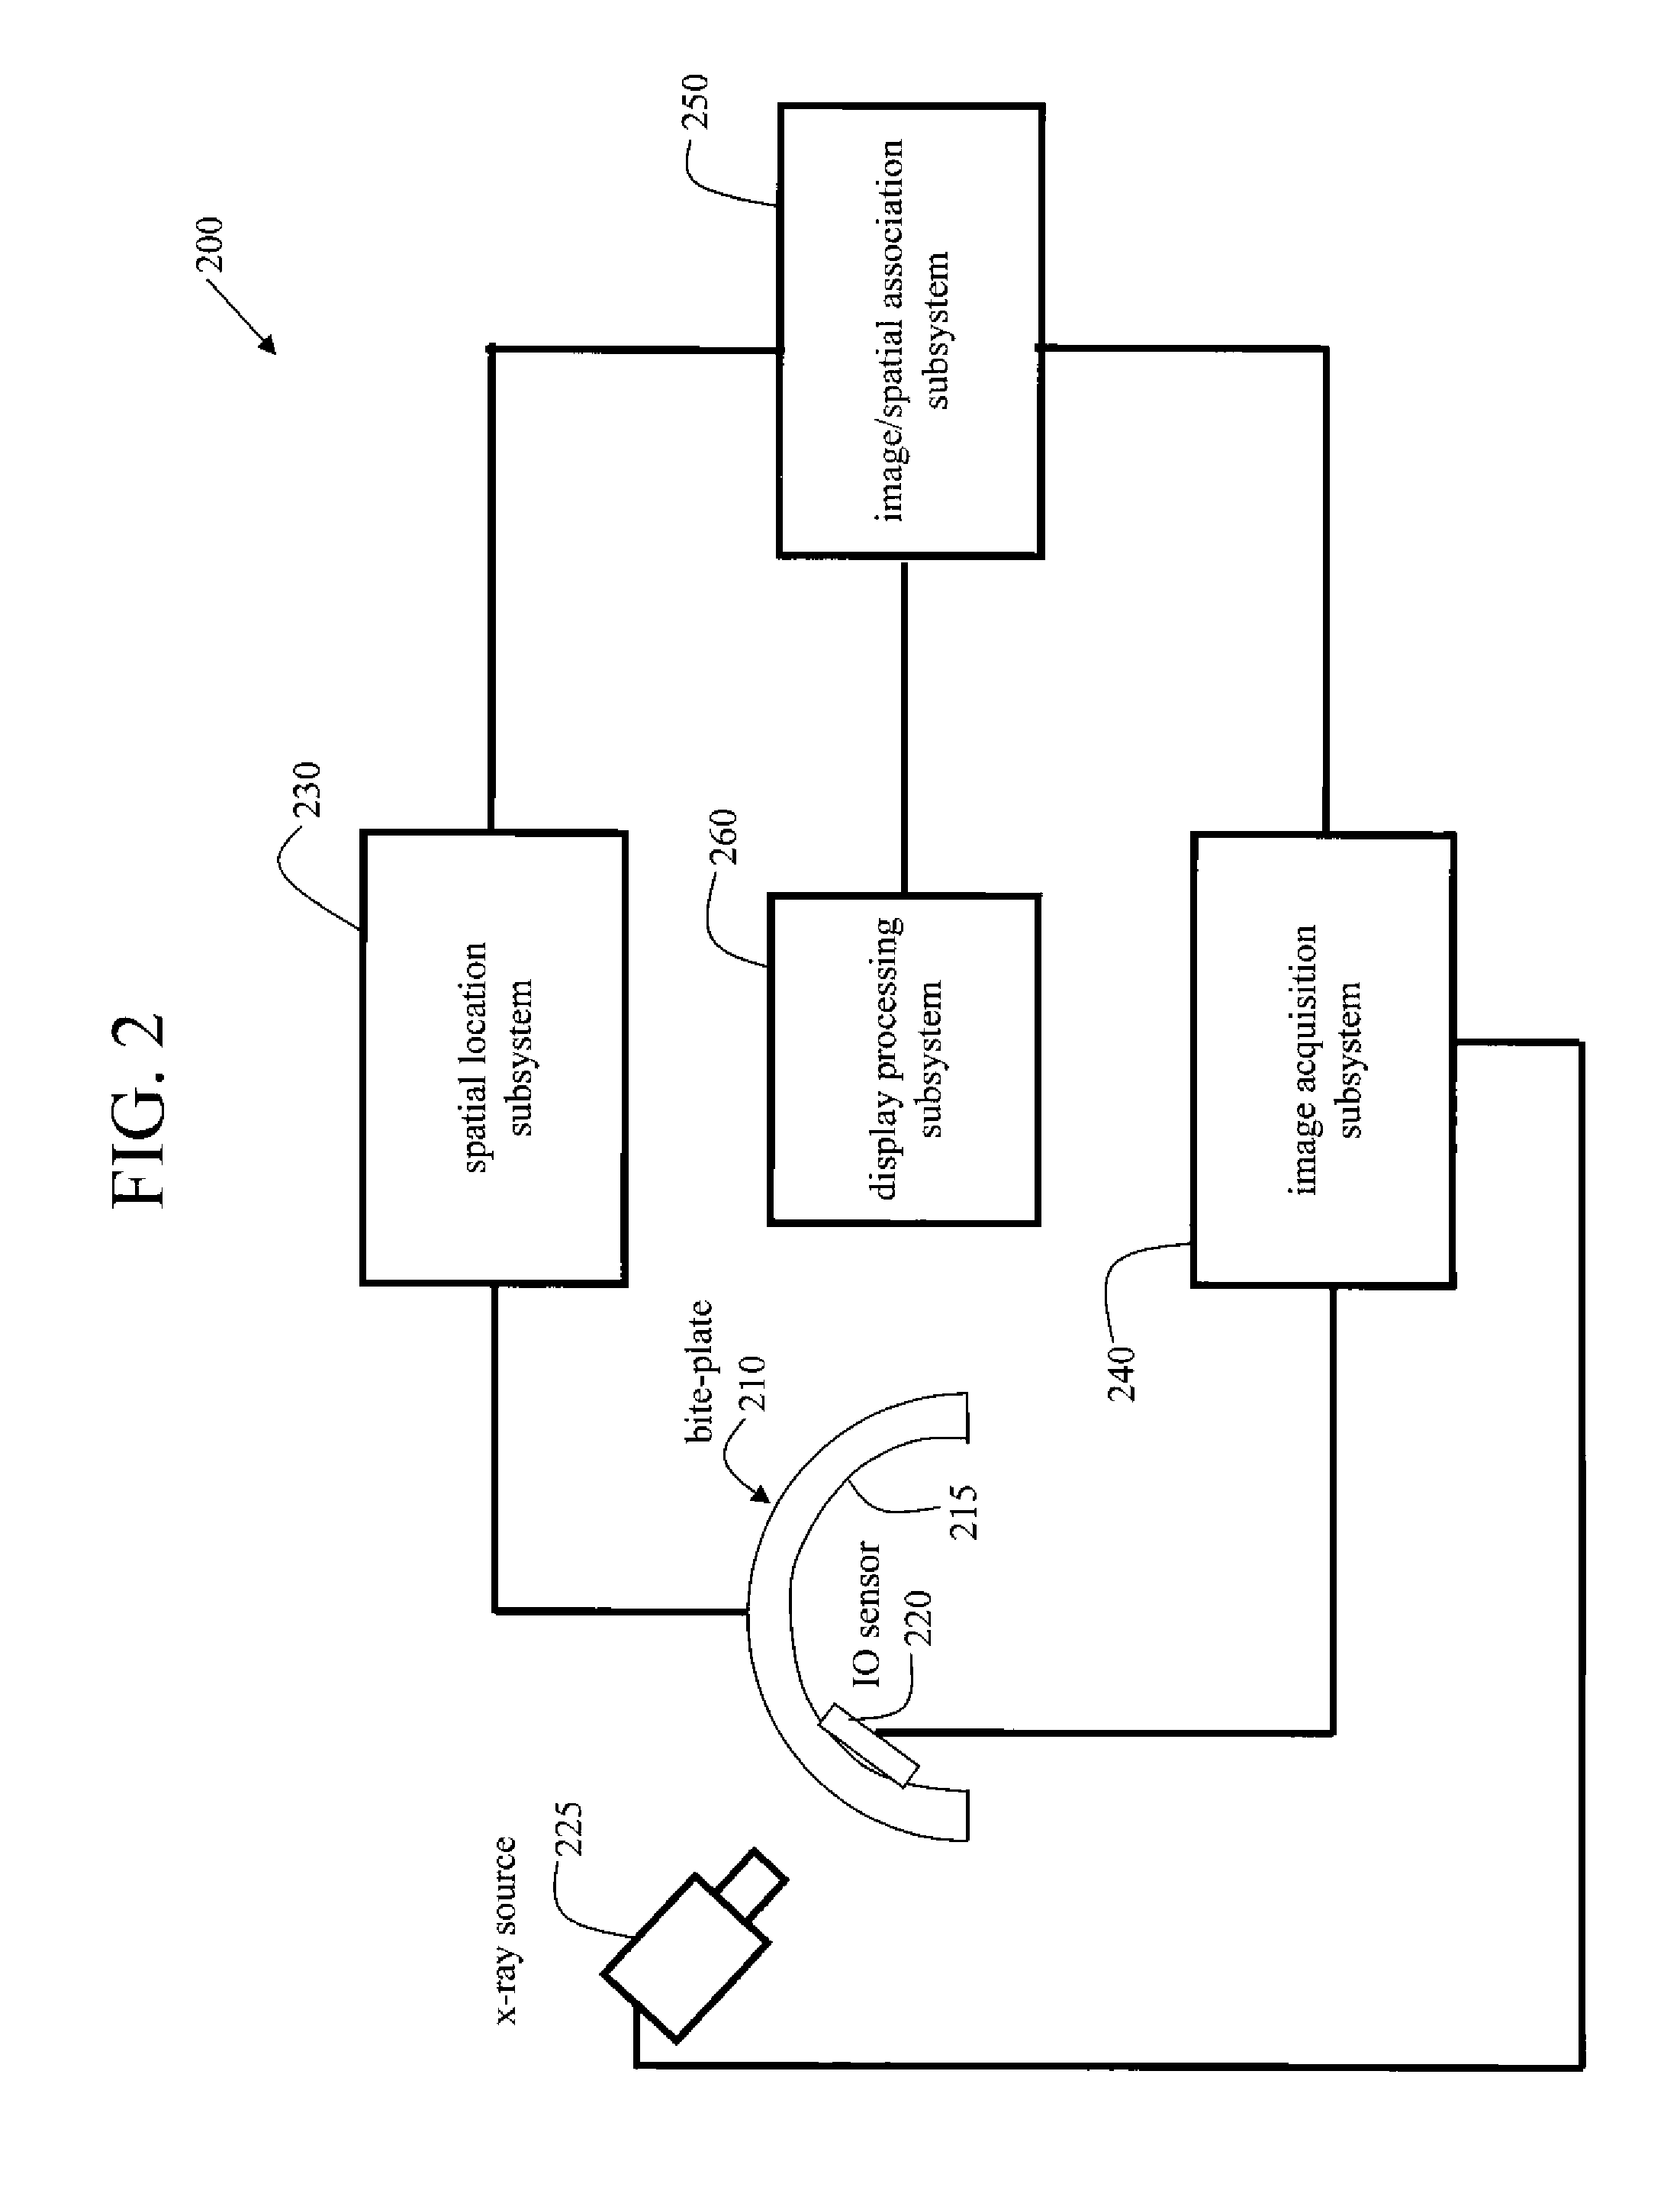 Method and system for automatic intra-oral sensor locating for image acquisition